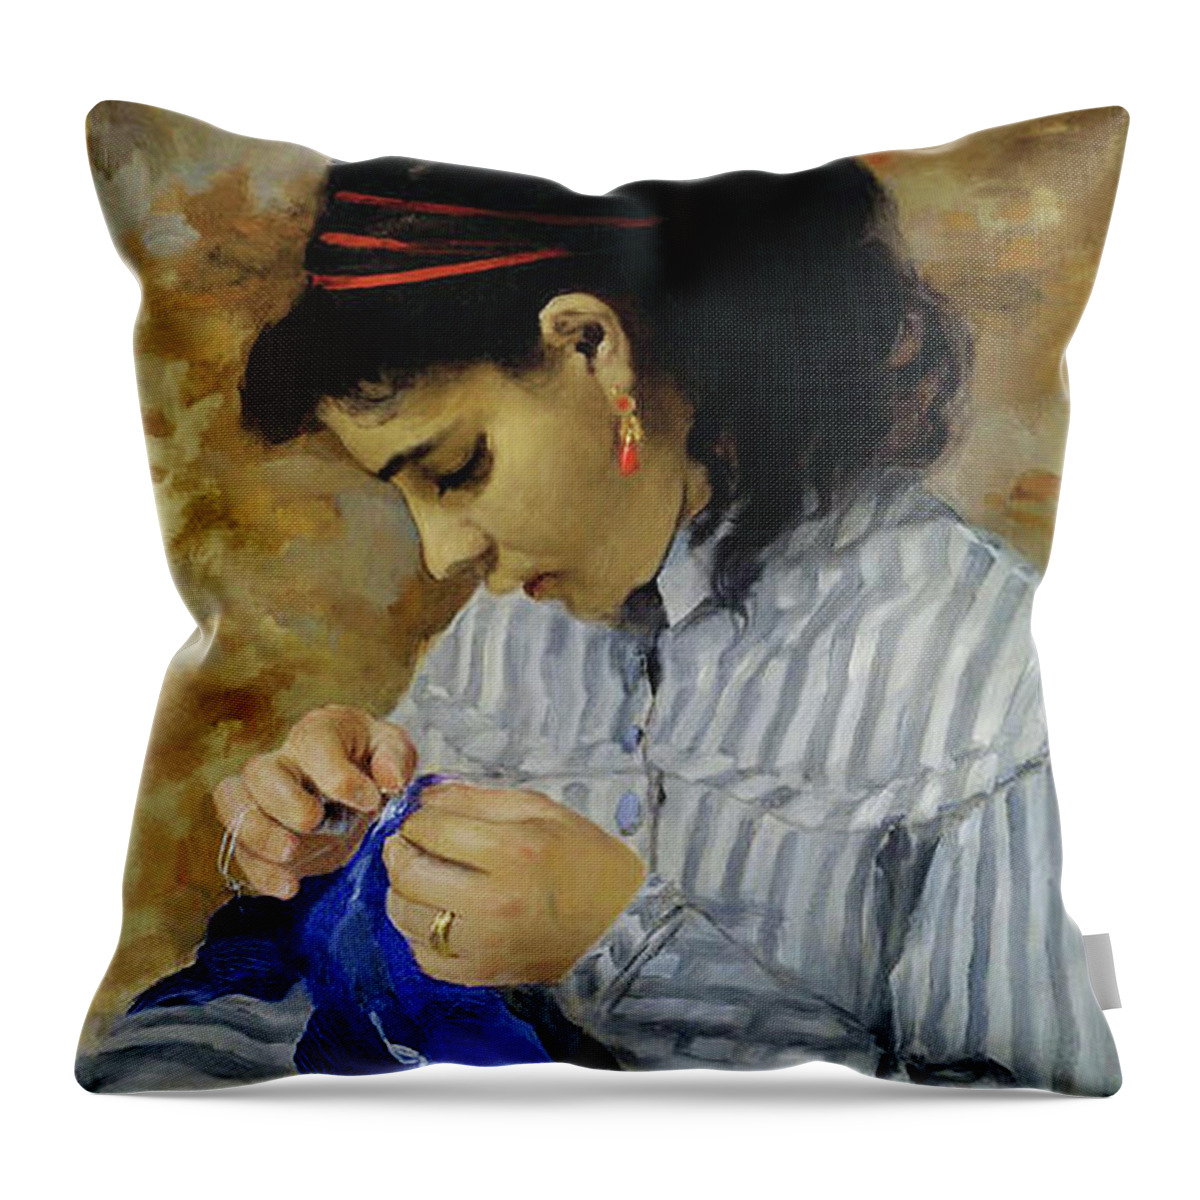 Sewing Throw Pillow featuring the mixed media Sewing Vintage Girl Simpler Times by Pierre Auguste Renoir